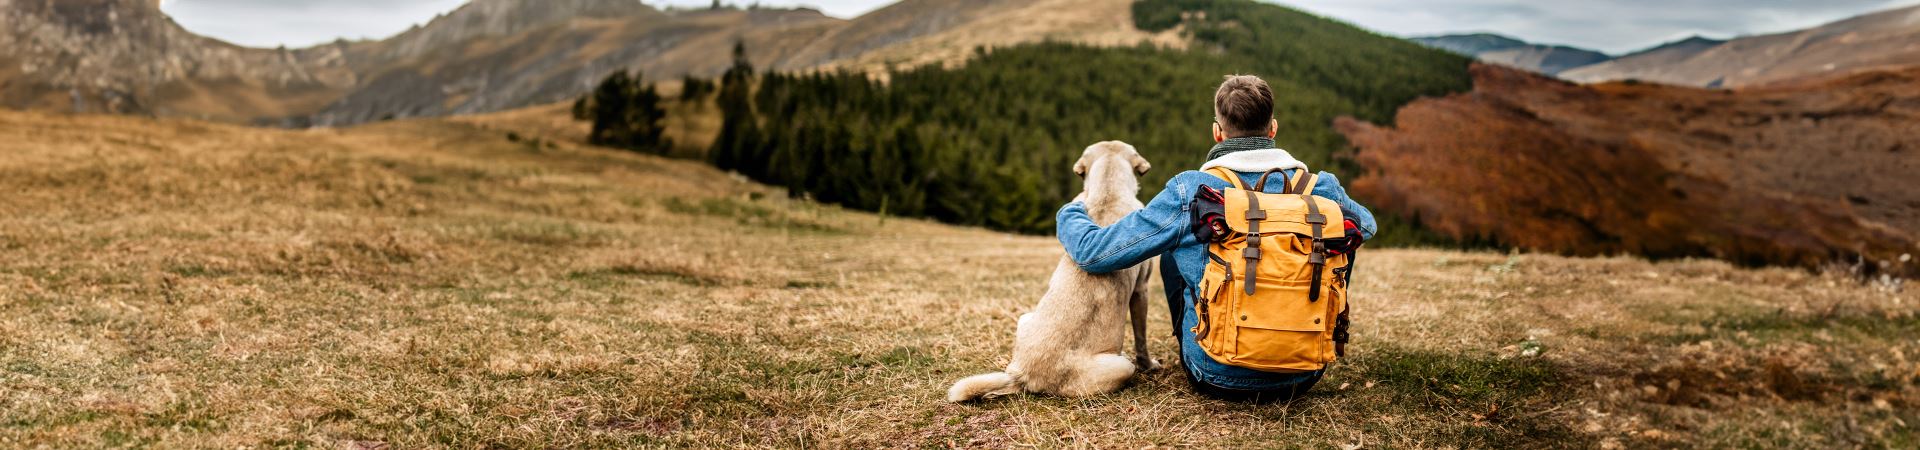 The picture shows a boy sitting with his back turned, and a large dog sitting next to him. They are both enjoying the view of a mountain range. The boy is wearing a backpack and resting his left arm on the dog.